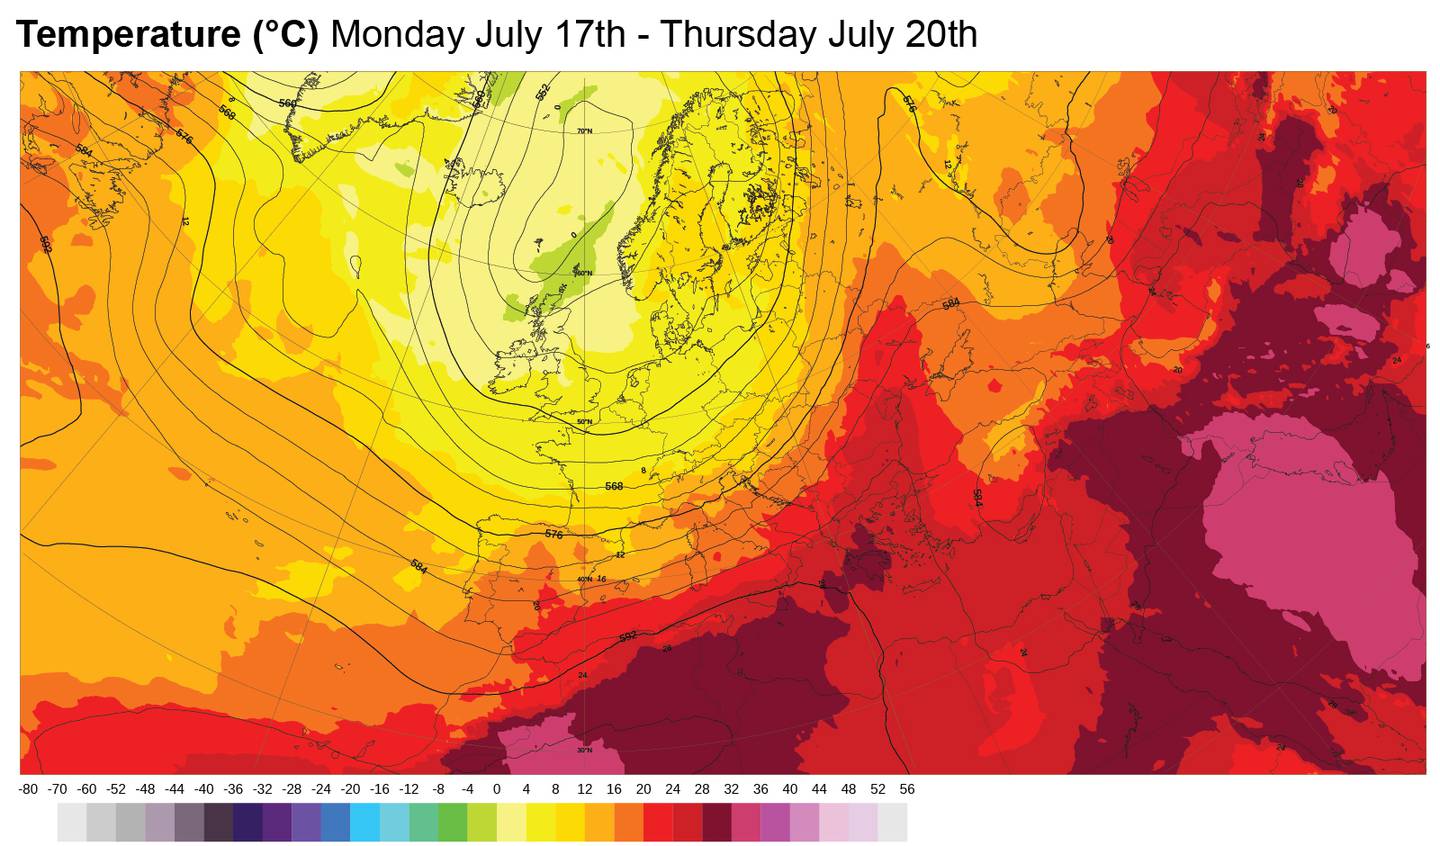 Temperature forecast from Monday July 17th - Thursday July 20th at 2 m above the earth's surface. Source: ECMWF (European Centre for Medium-Range Weather Forecasts)